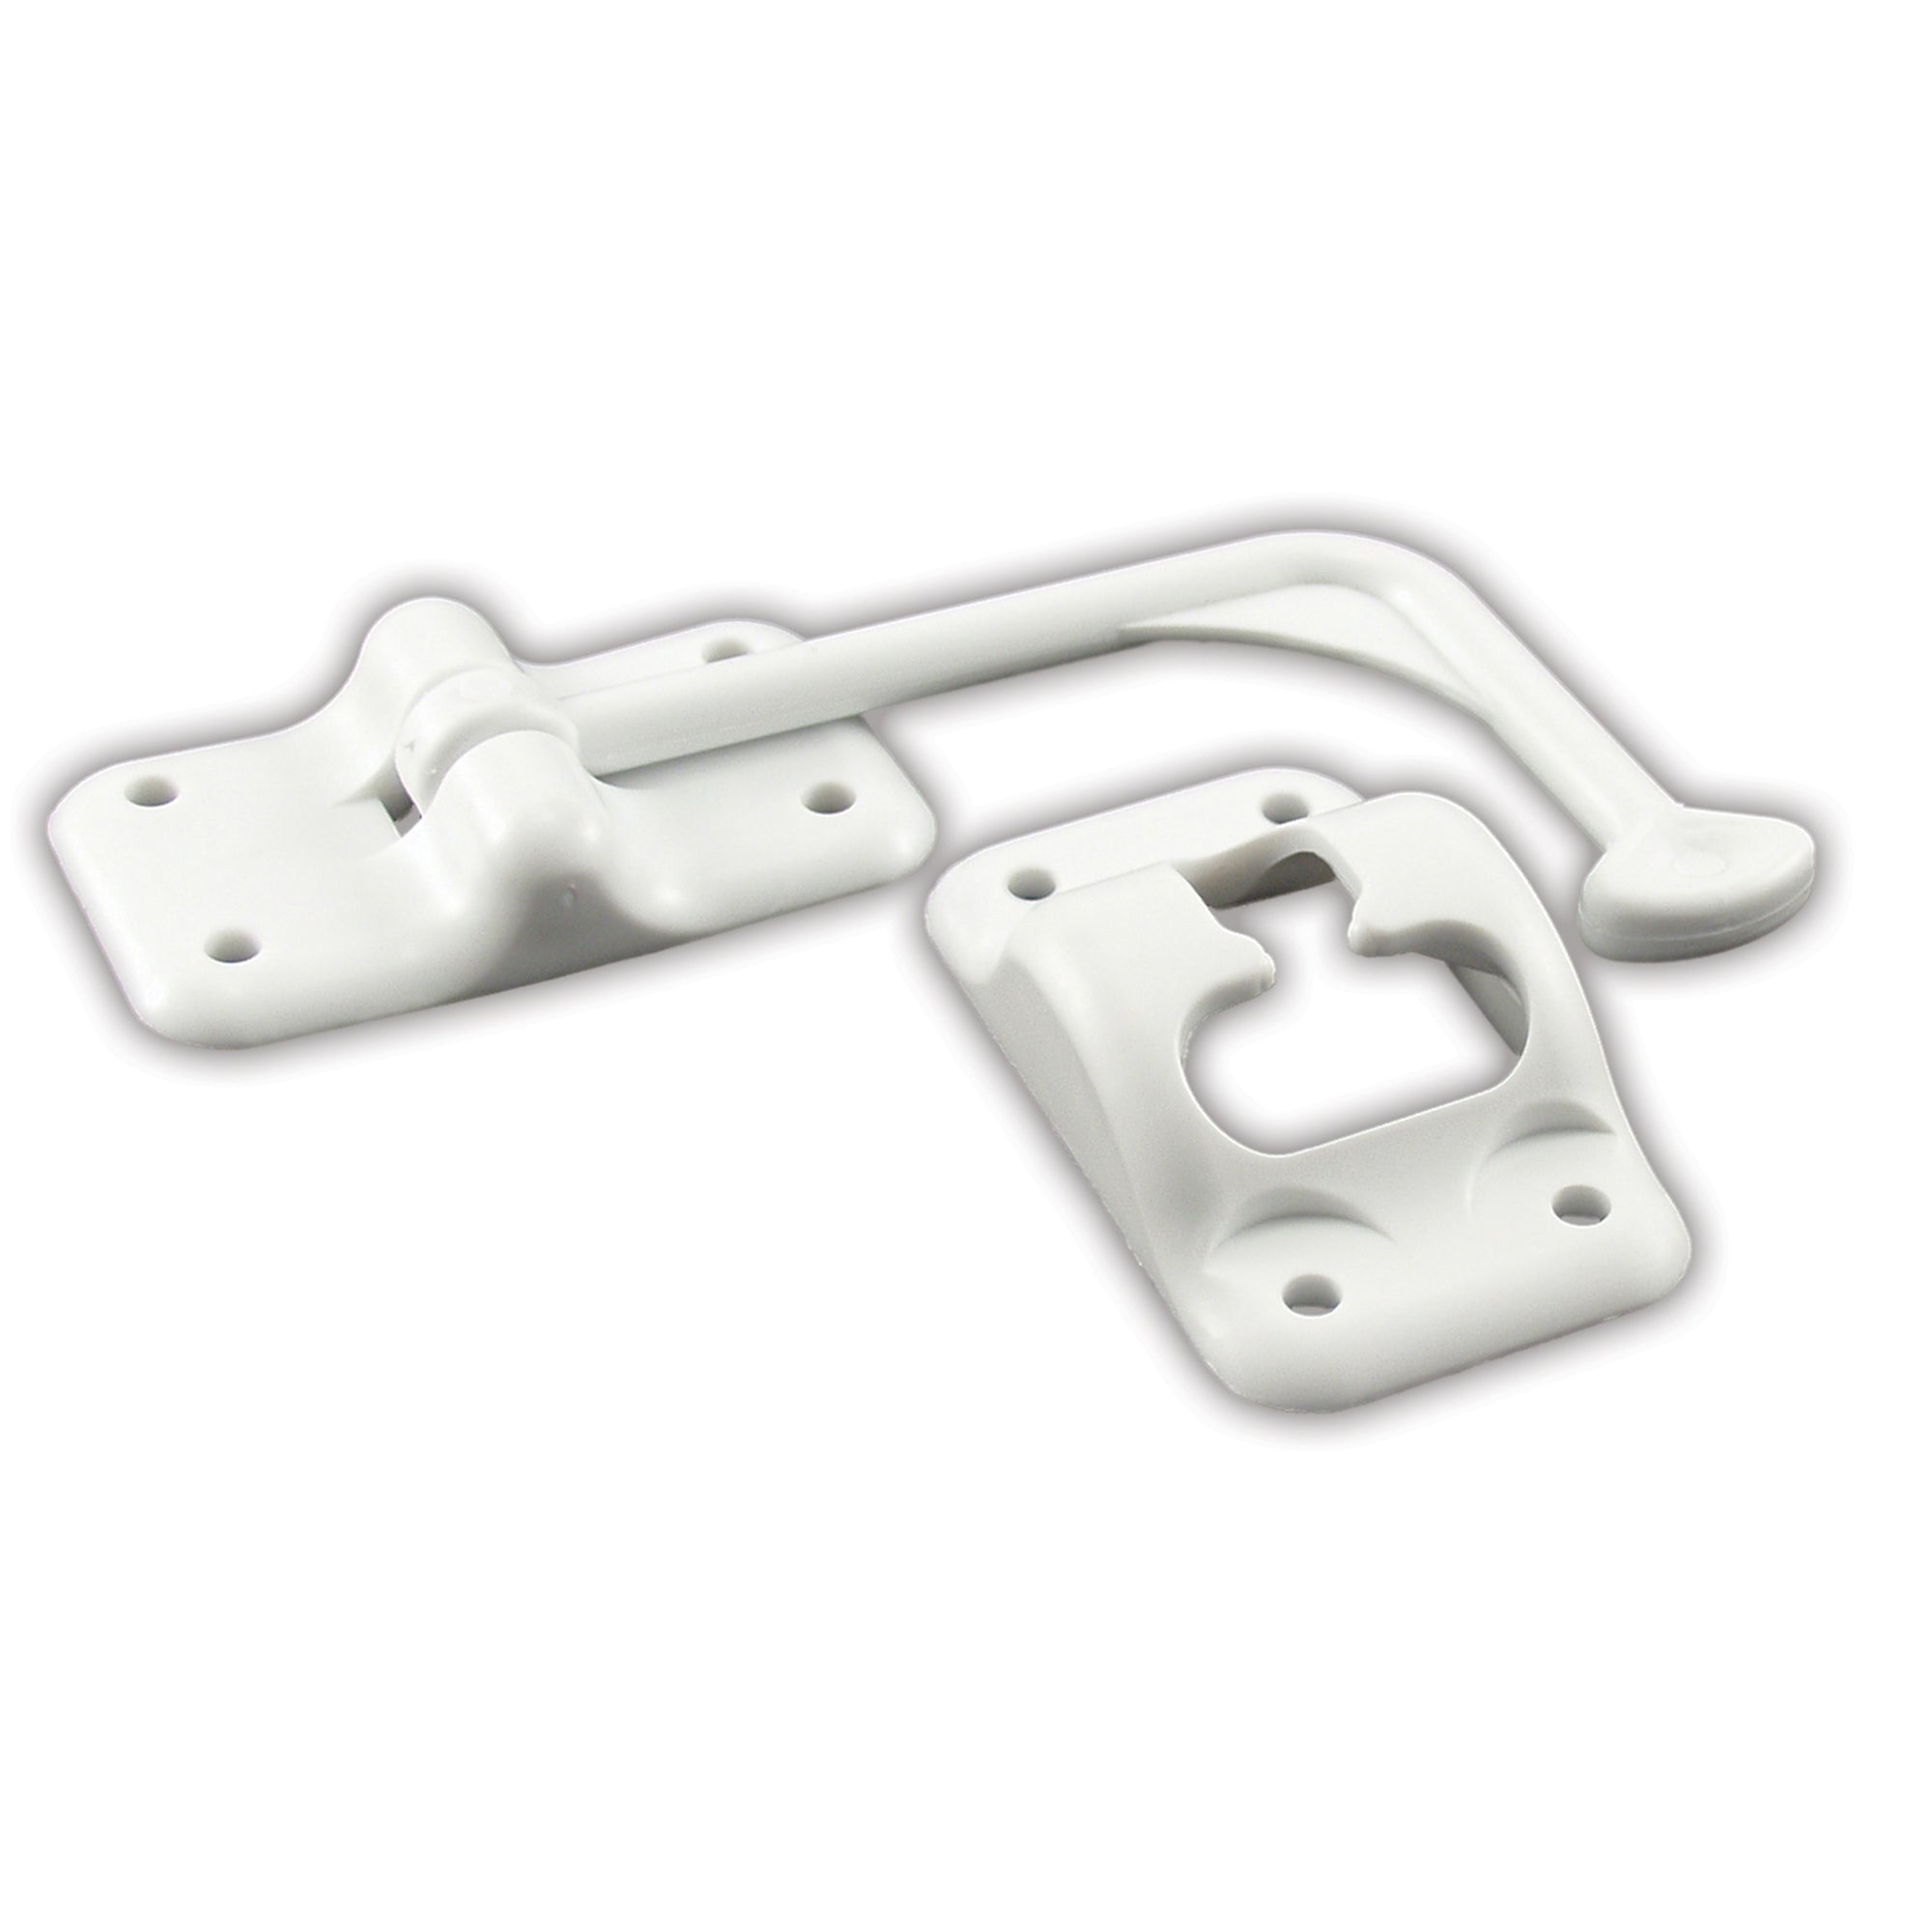 JR Products 10605 Plastic 90° T-Style Door Holder - Polar White, 6"